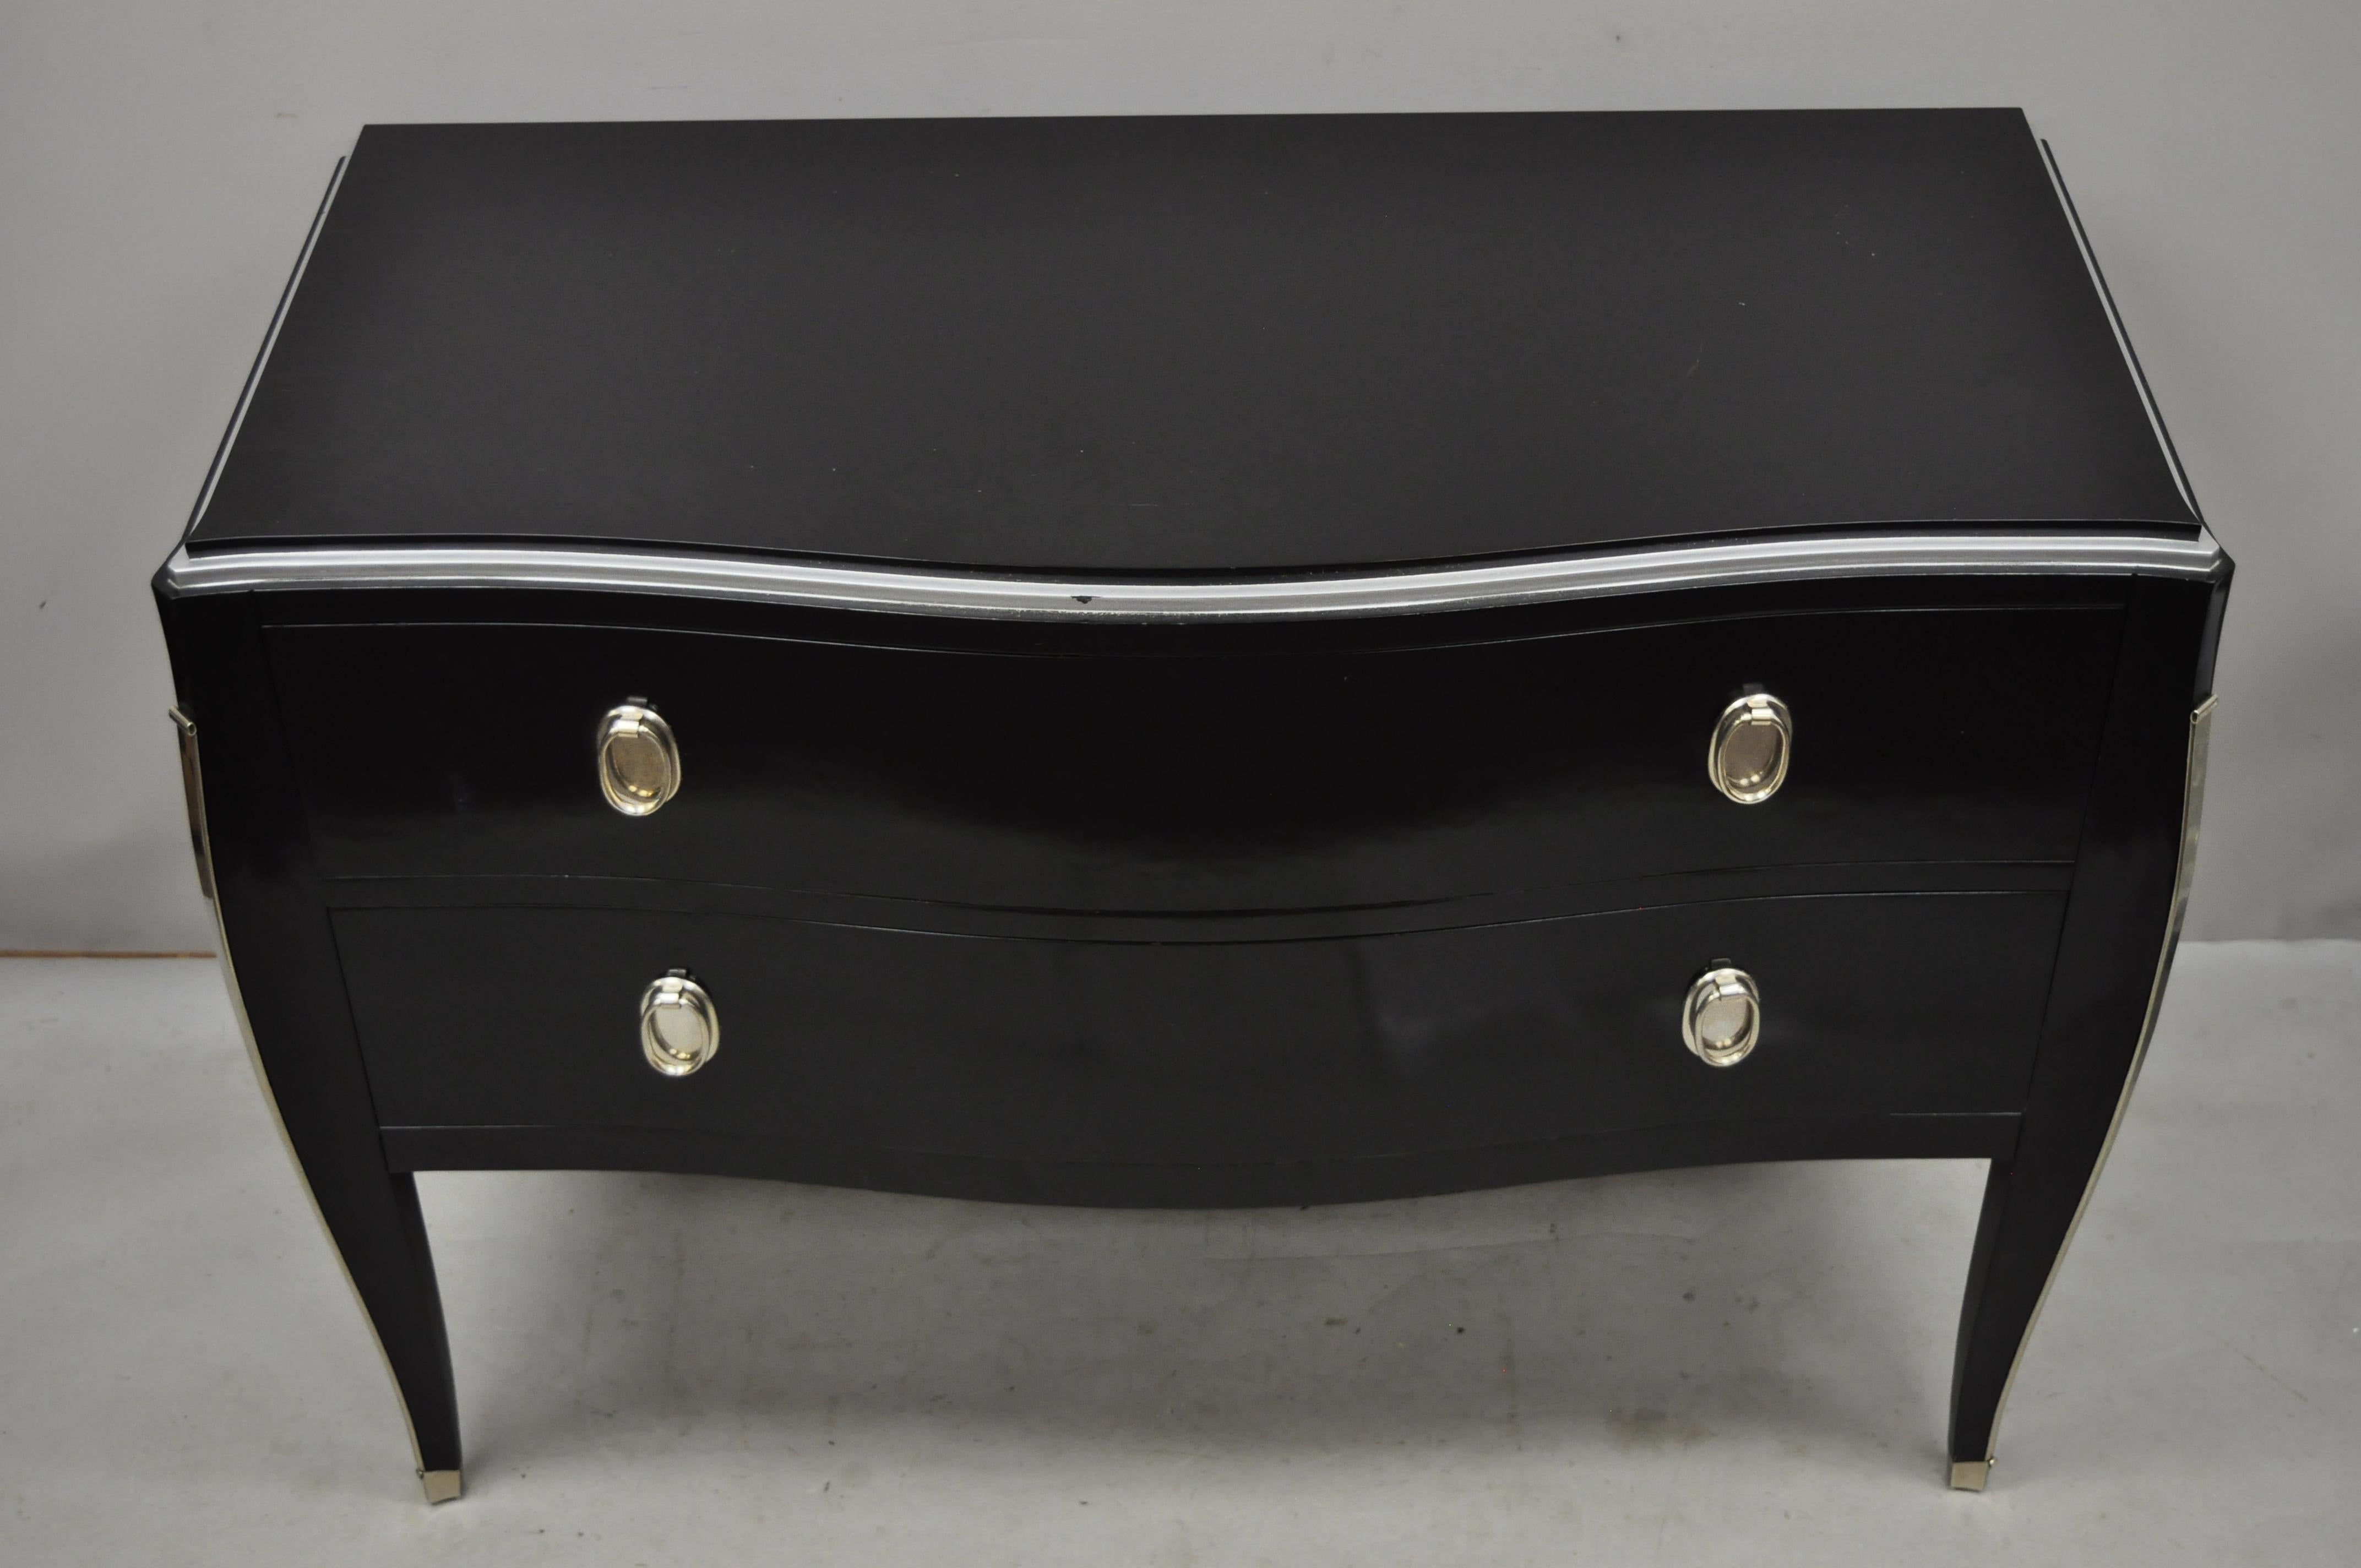 Contemporary black lacquer bombe commode 2-drawer Italian chest by Zichele. Item features silver painted trim to top edge, nickel metal ormolu to front legs and feet, solid wood frame, original label, 2 dovetailed drawers, cabriole legs, solid